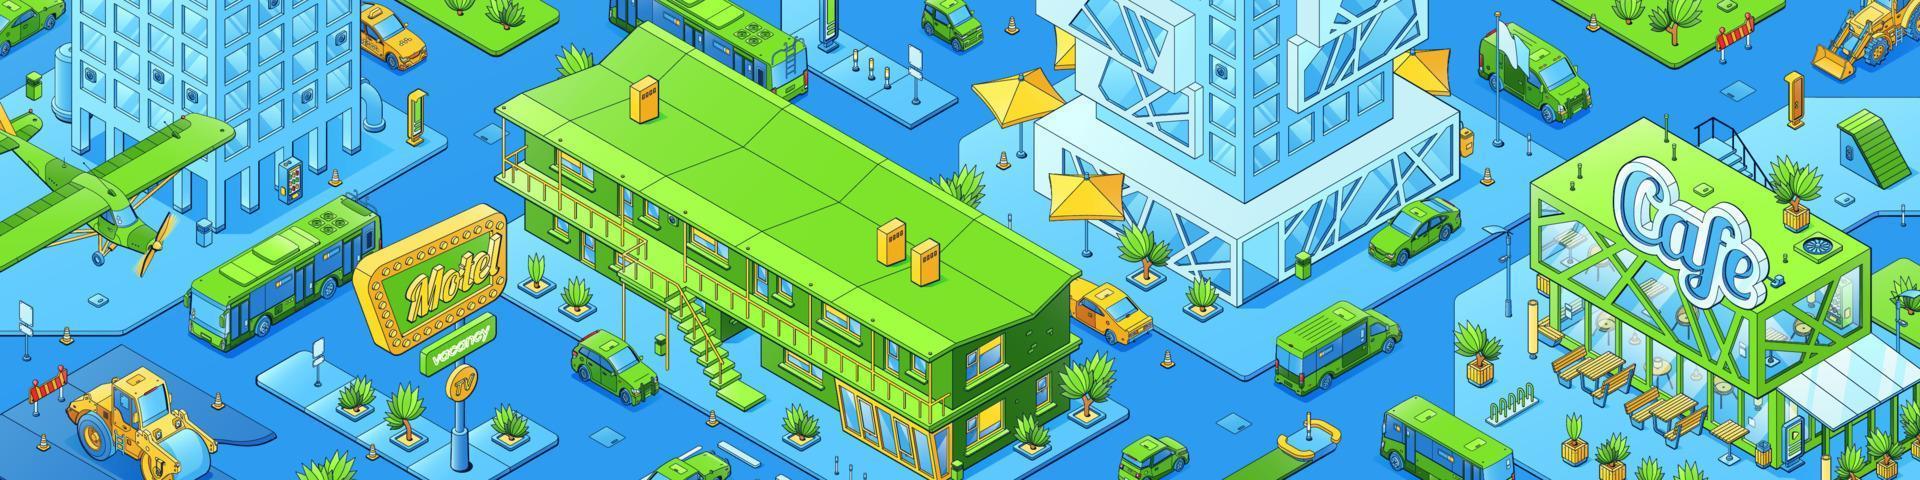 Isometric cityscape with cafe and motel vector